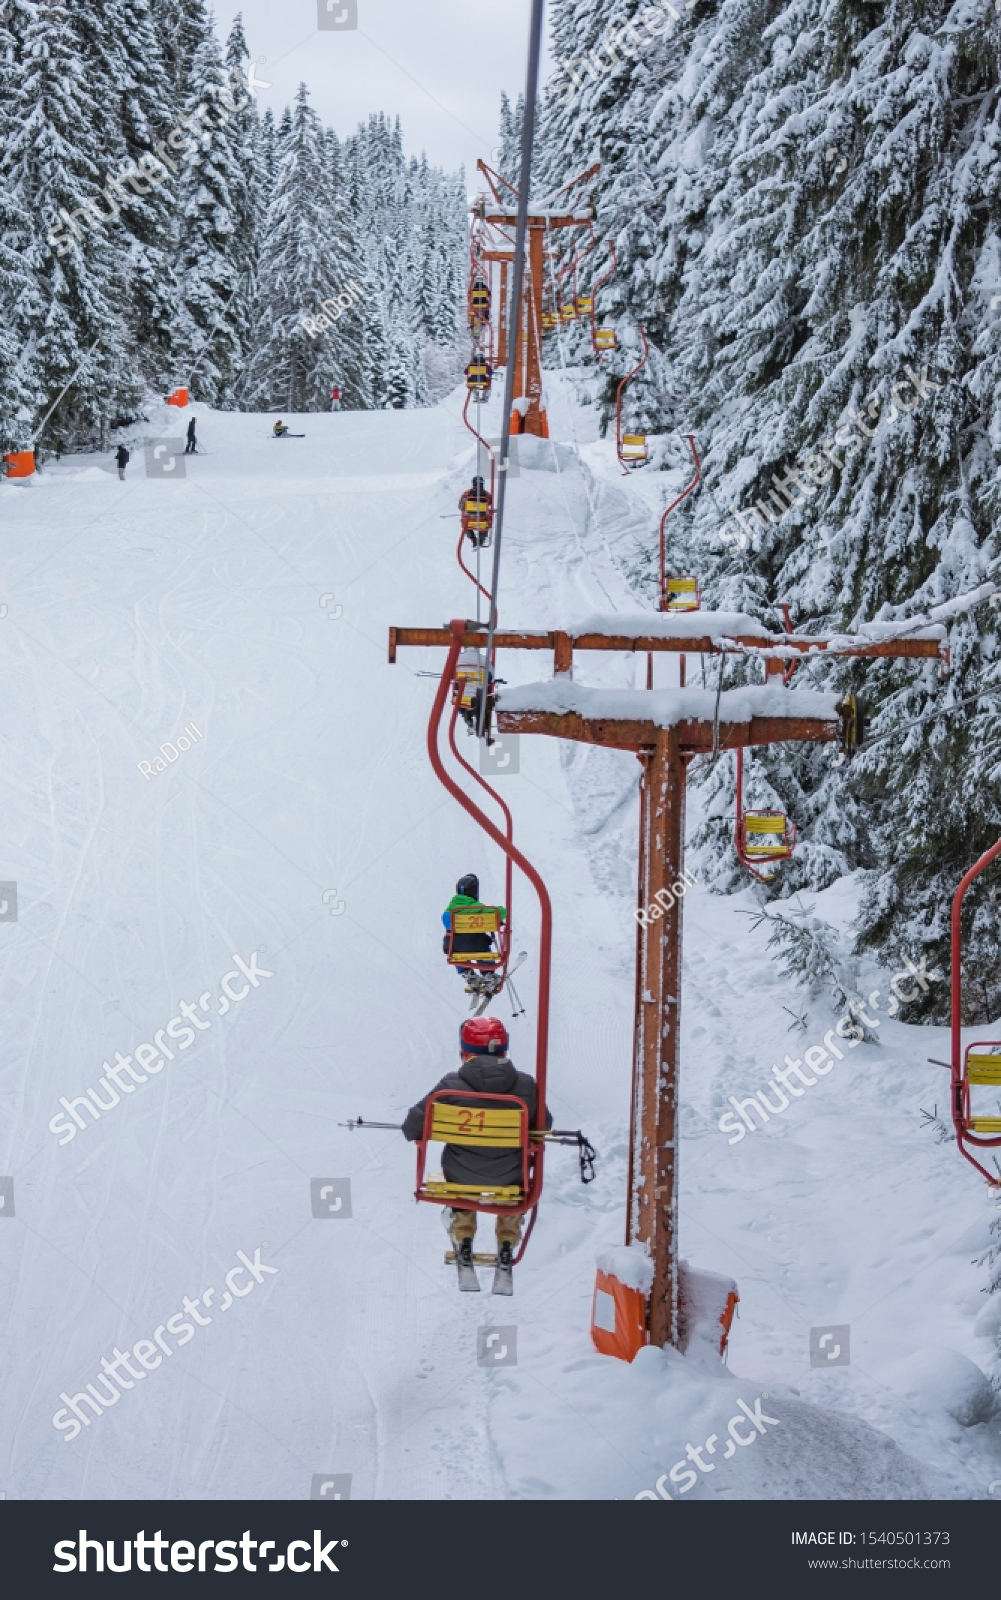 Chair ski lift next to slope for skis and snowboards. Skiers are sitting at old fashioned chair ski lift. Ski area in snowy high mountain. Sports and recreation concept. Selective focus. #1540501373